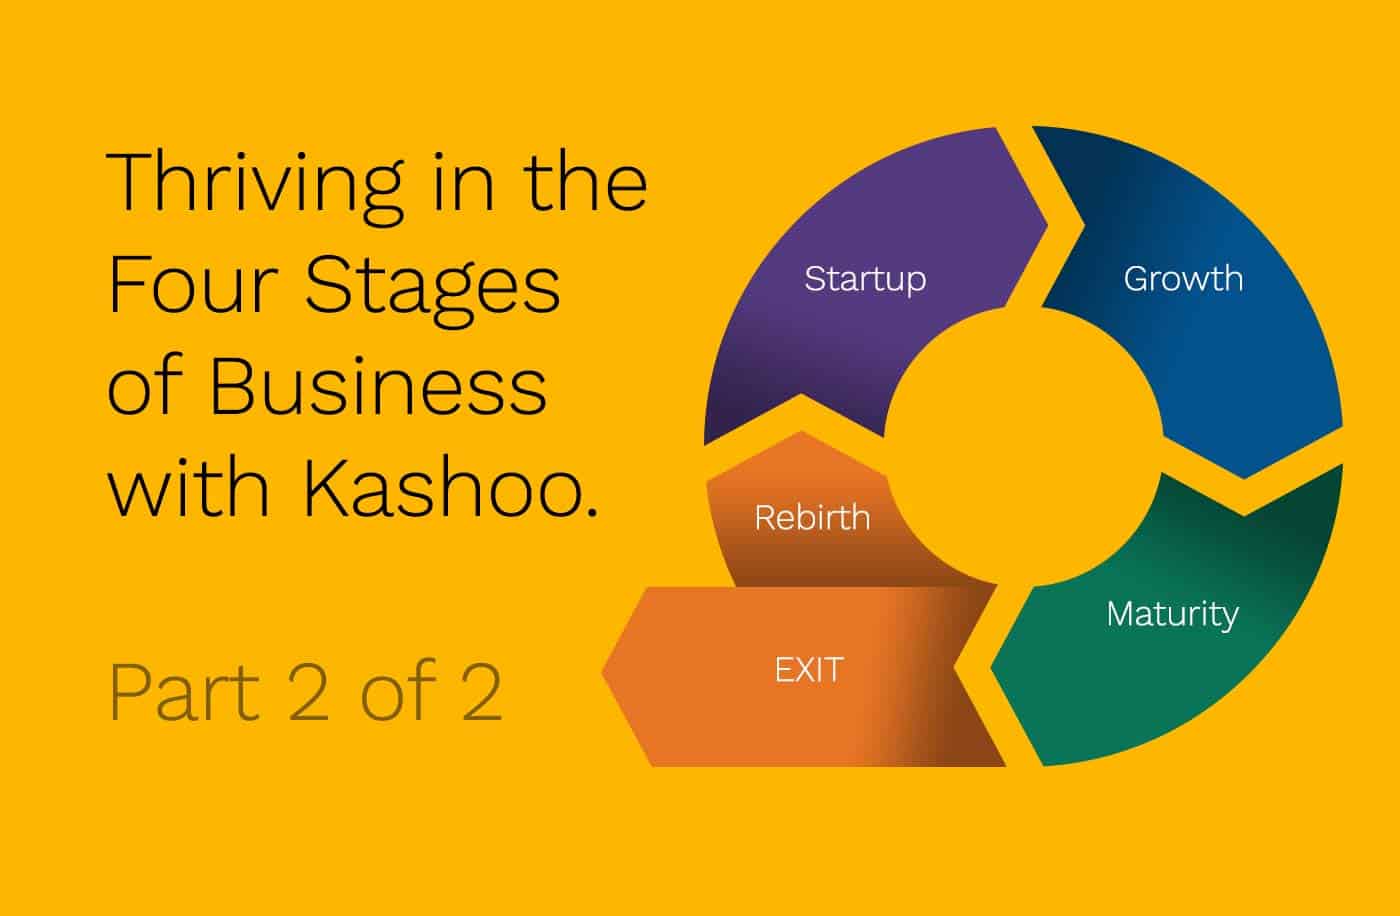 Thriving in the four stages of Business with Kashoo. Part 2 of 2